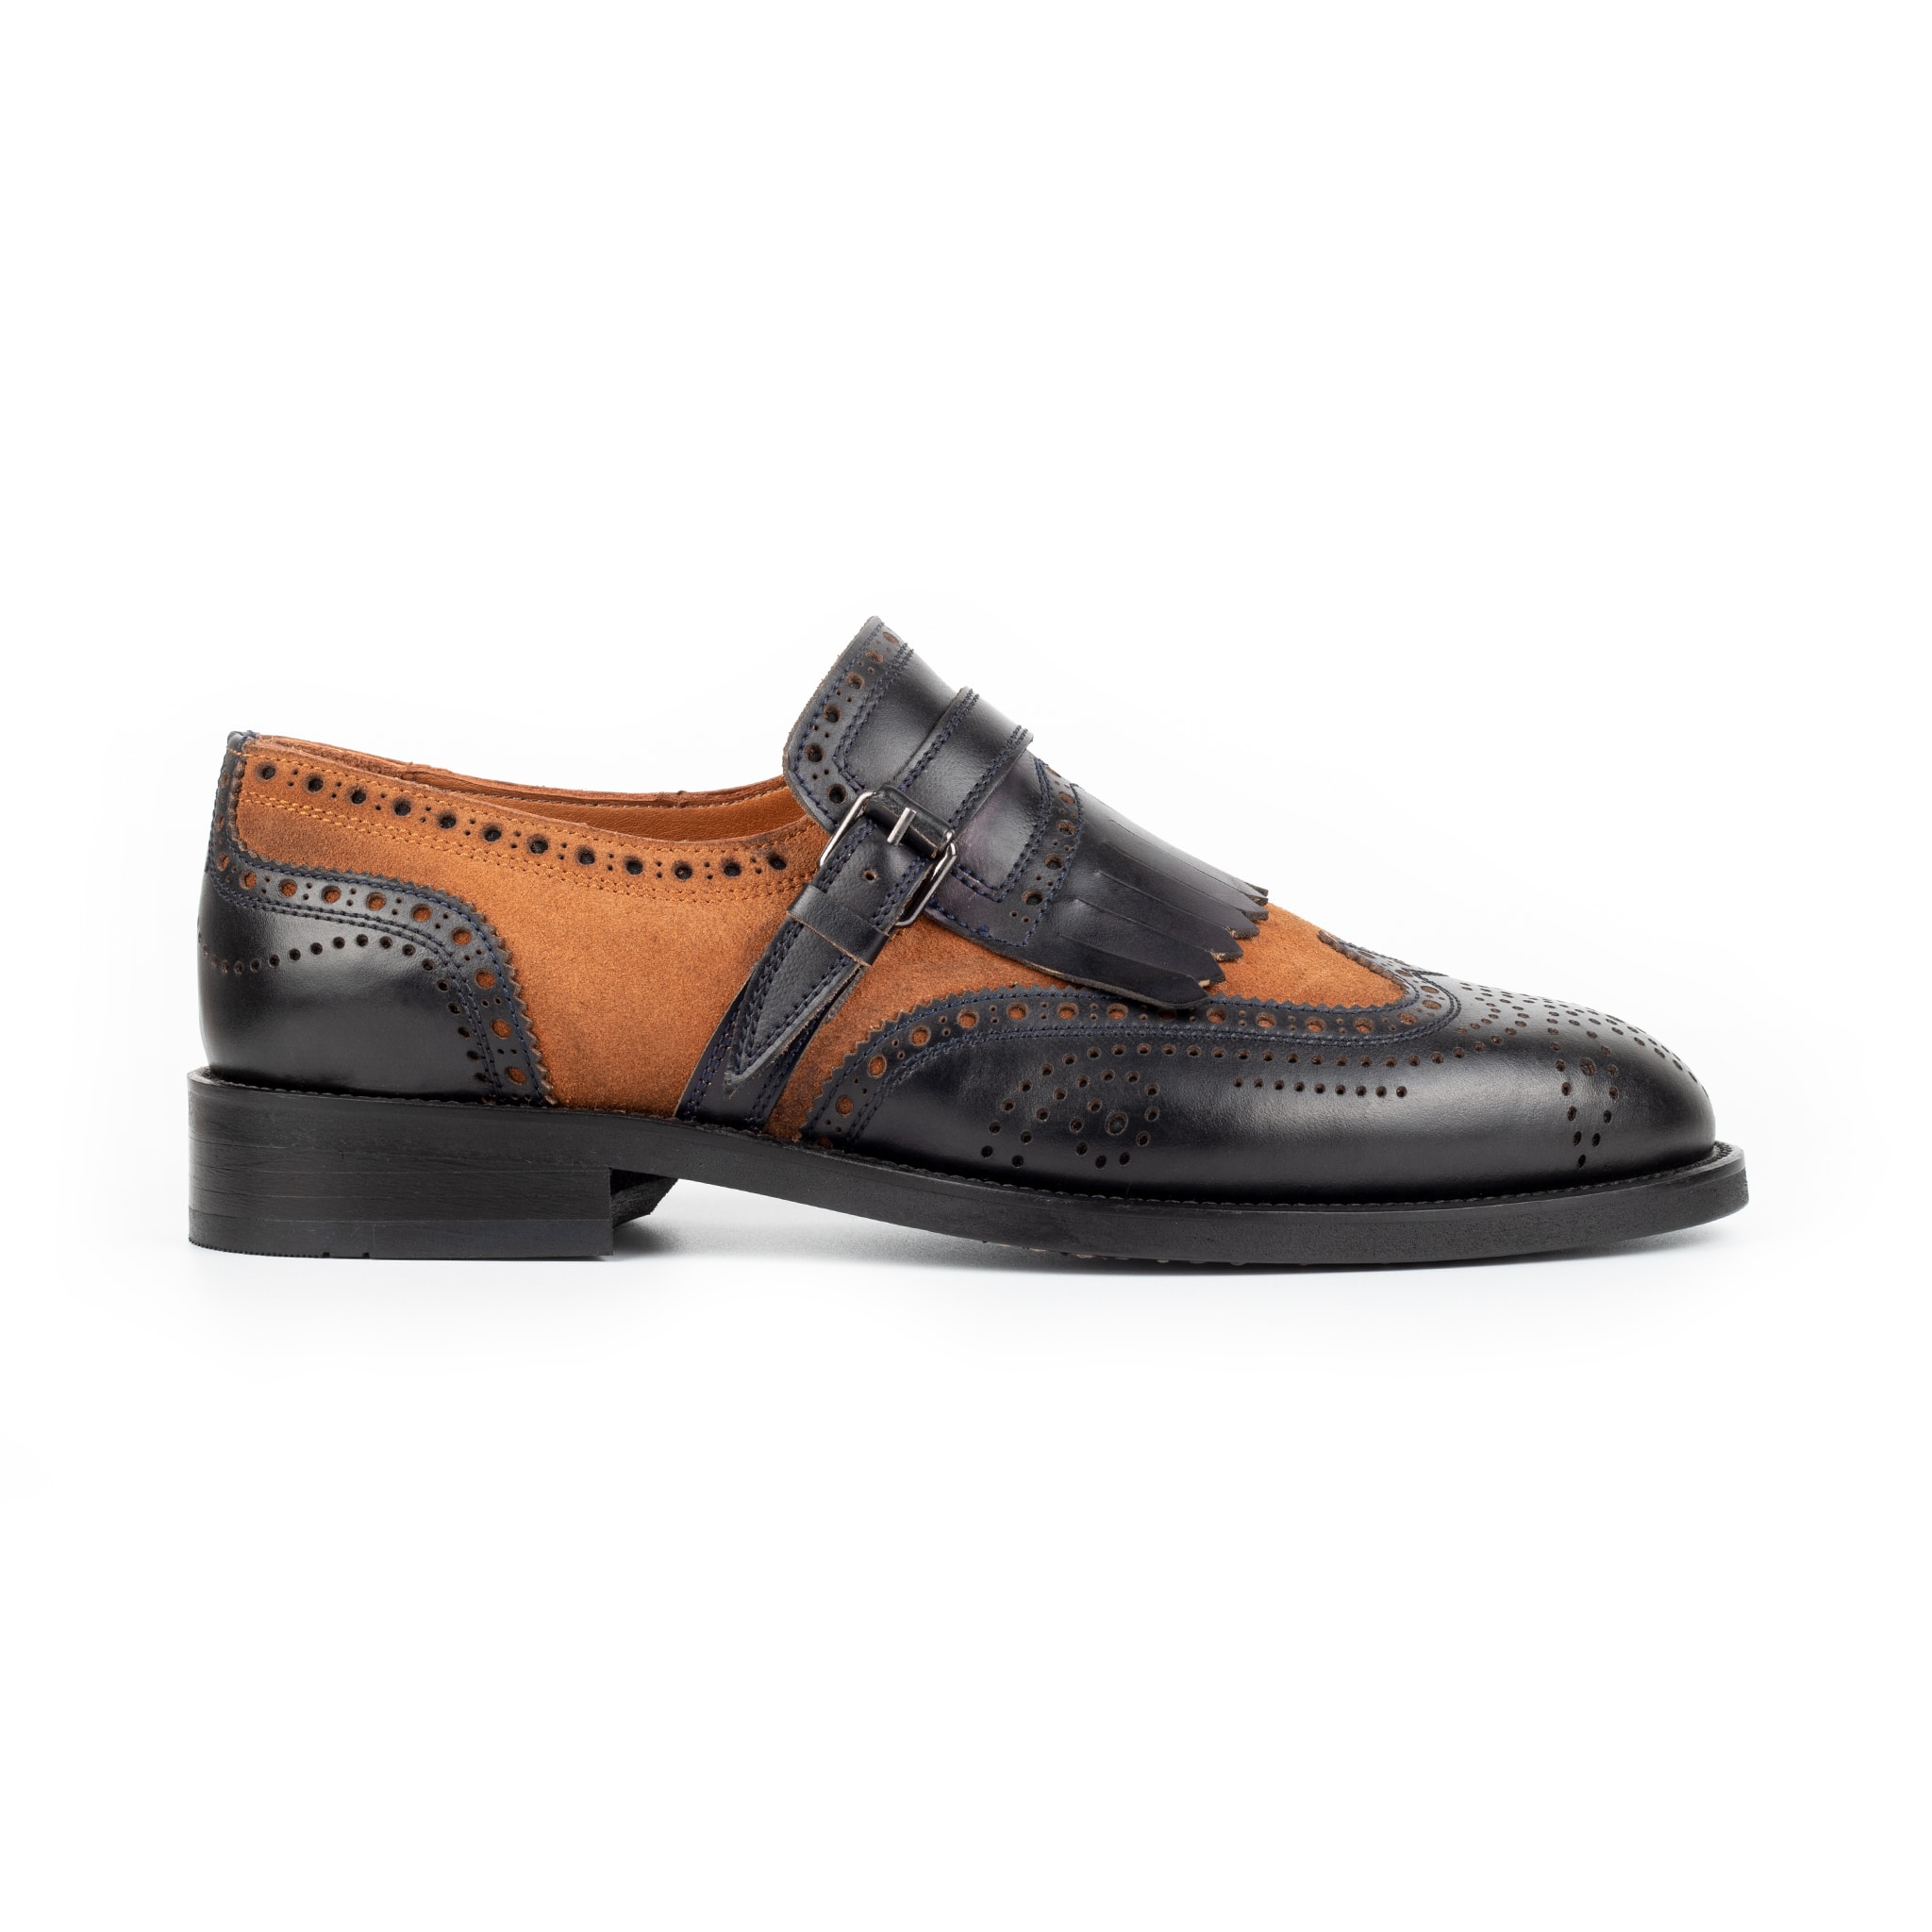 Zerbay | Handcrafted Men's Leather Shoes